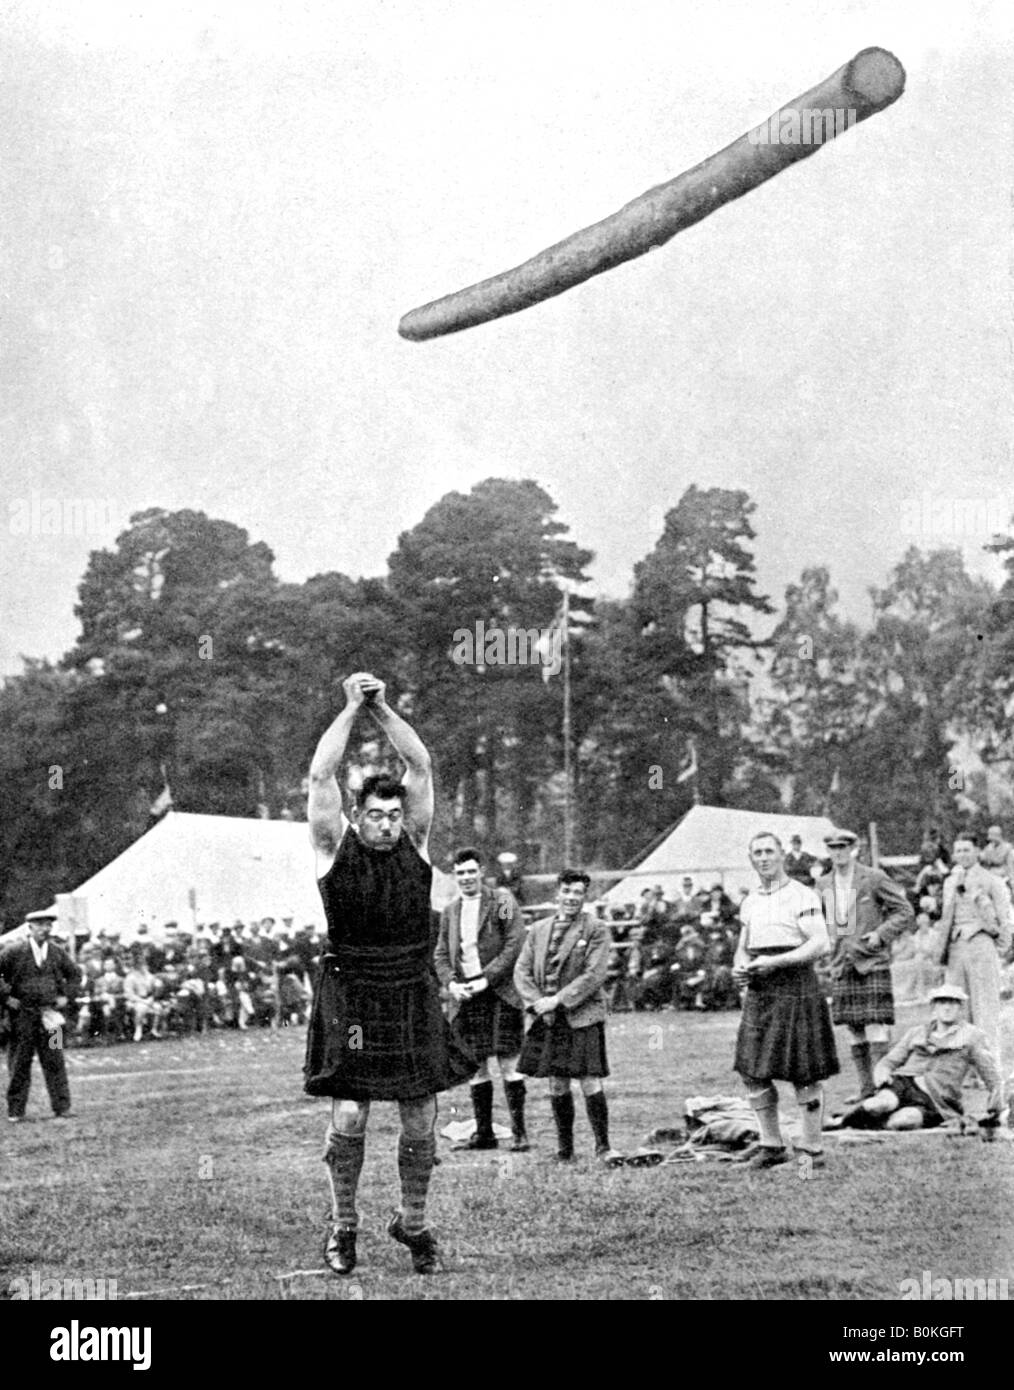 Tossing the caber at the Highland games, Scotland, 1936. Artist: Fox Stock Photo